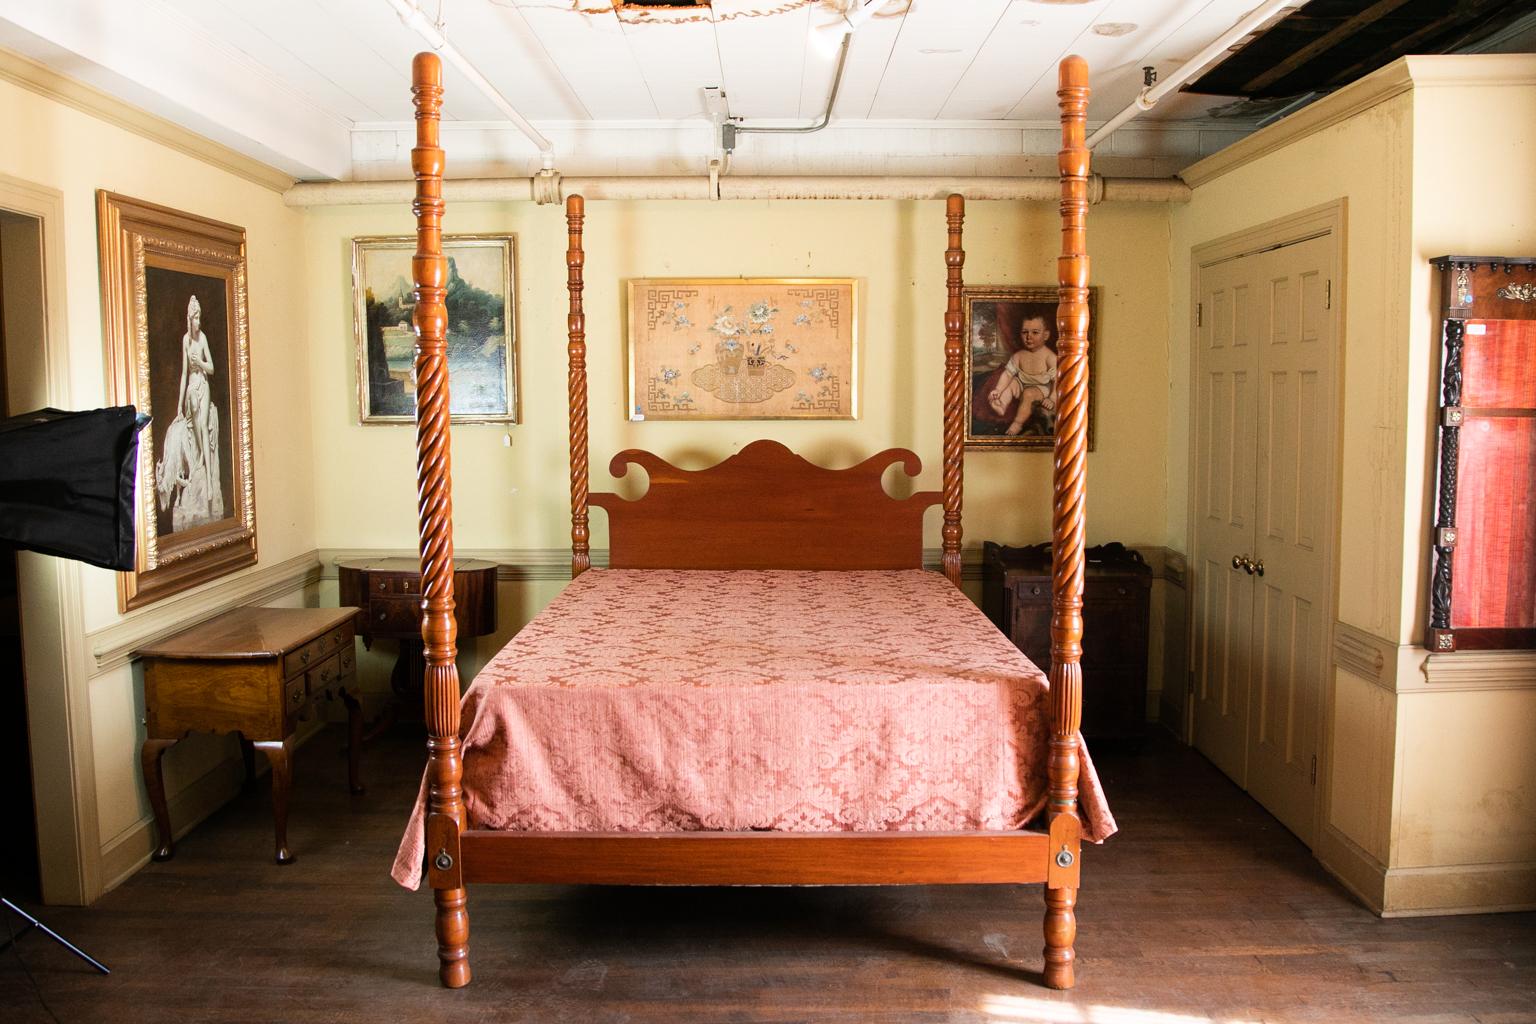 Spiral turned queen size poster bed is fruitwood with a scrolled headboard. The four posts have reeded knops and terminate in turned feet. The four posts date to circa 1840, the rails and headboard have been custom made to accommodate a contemporary